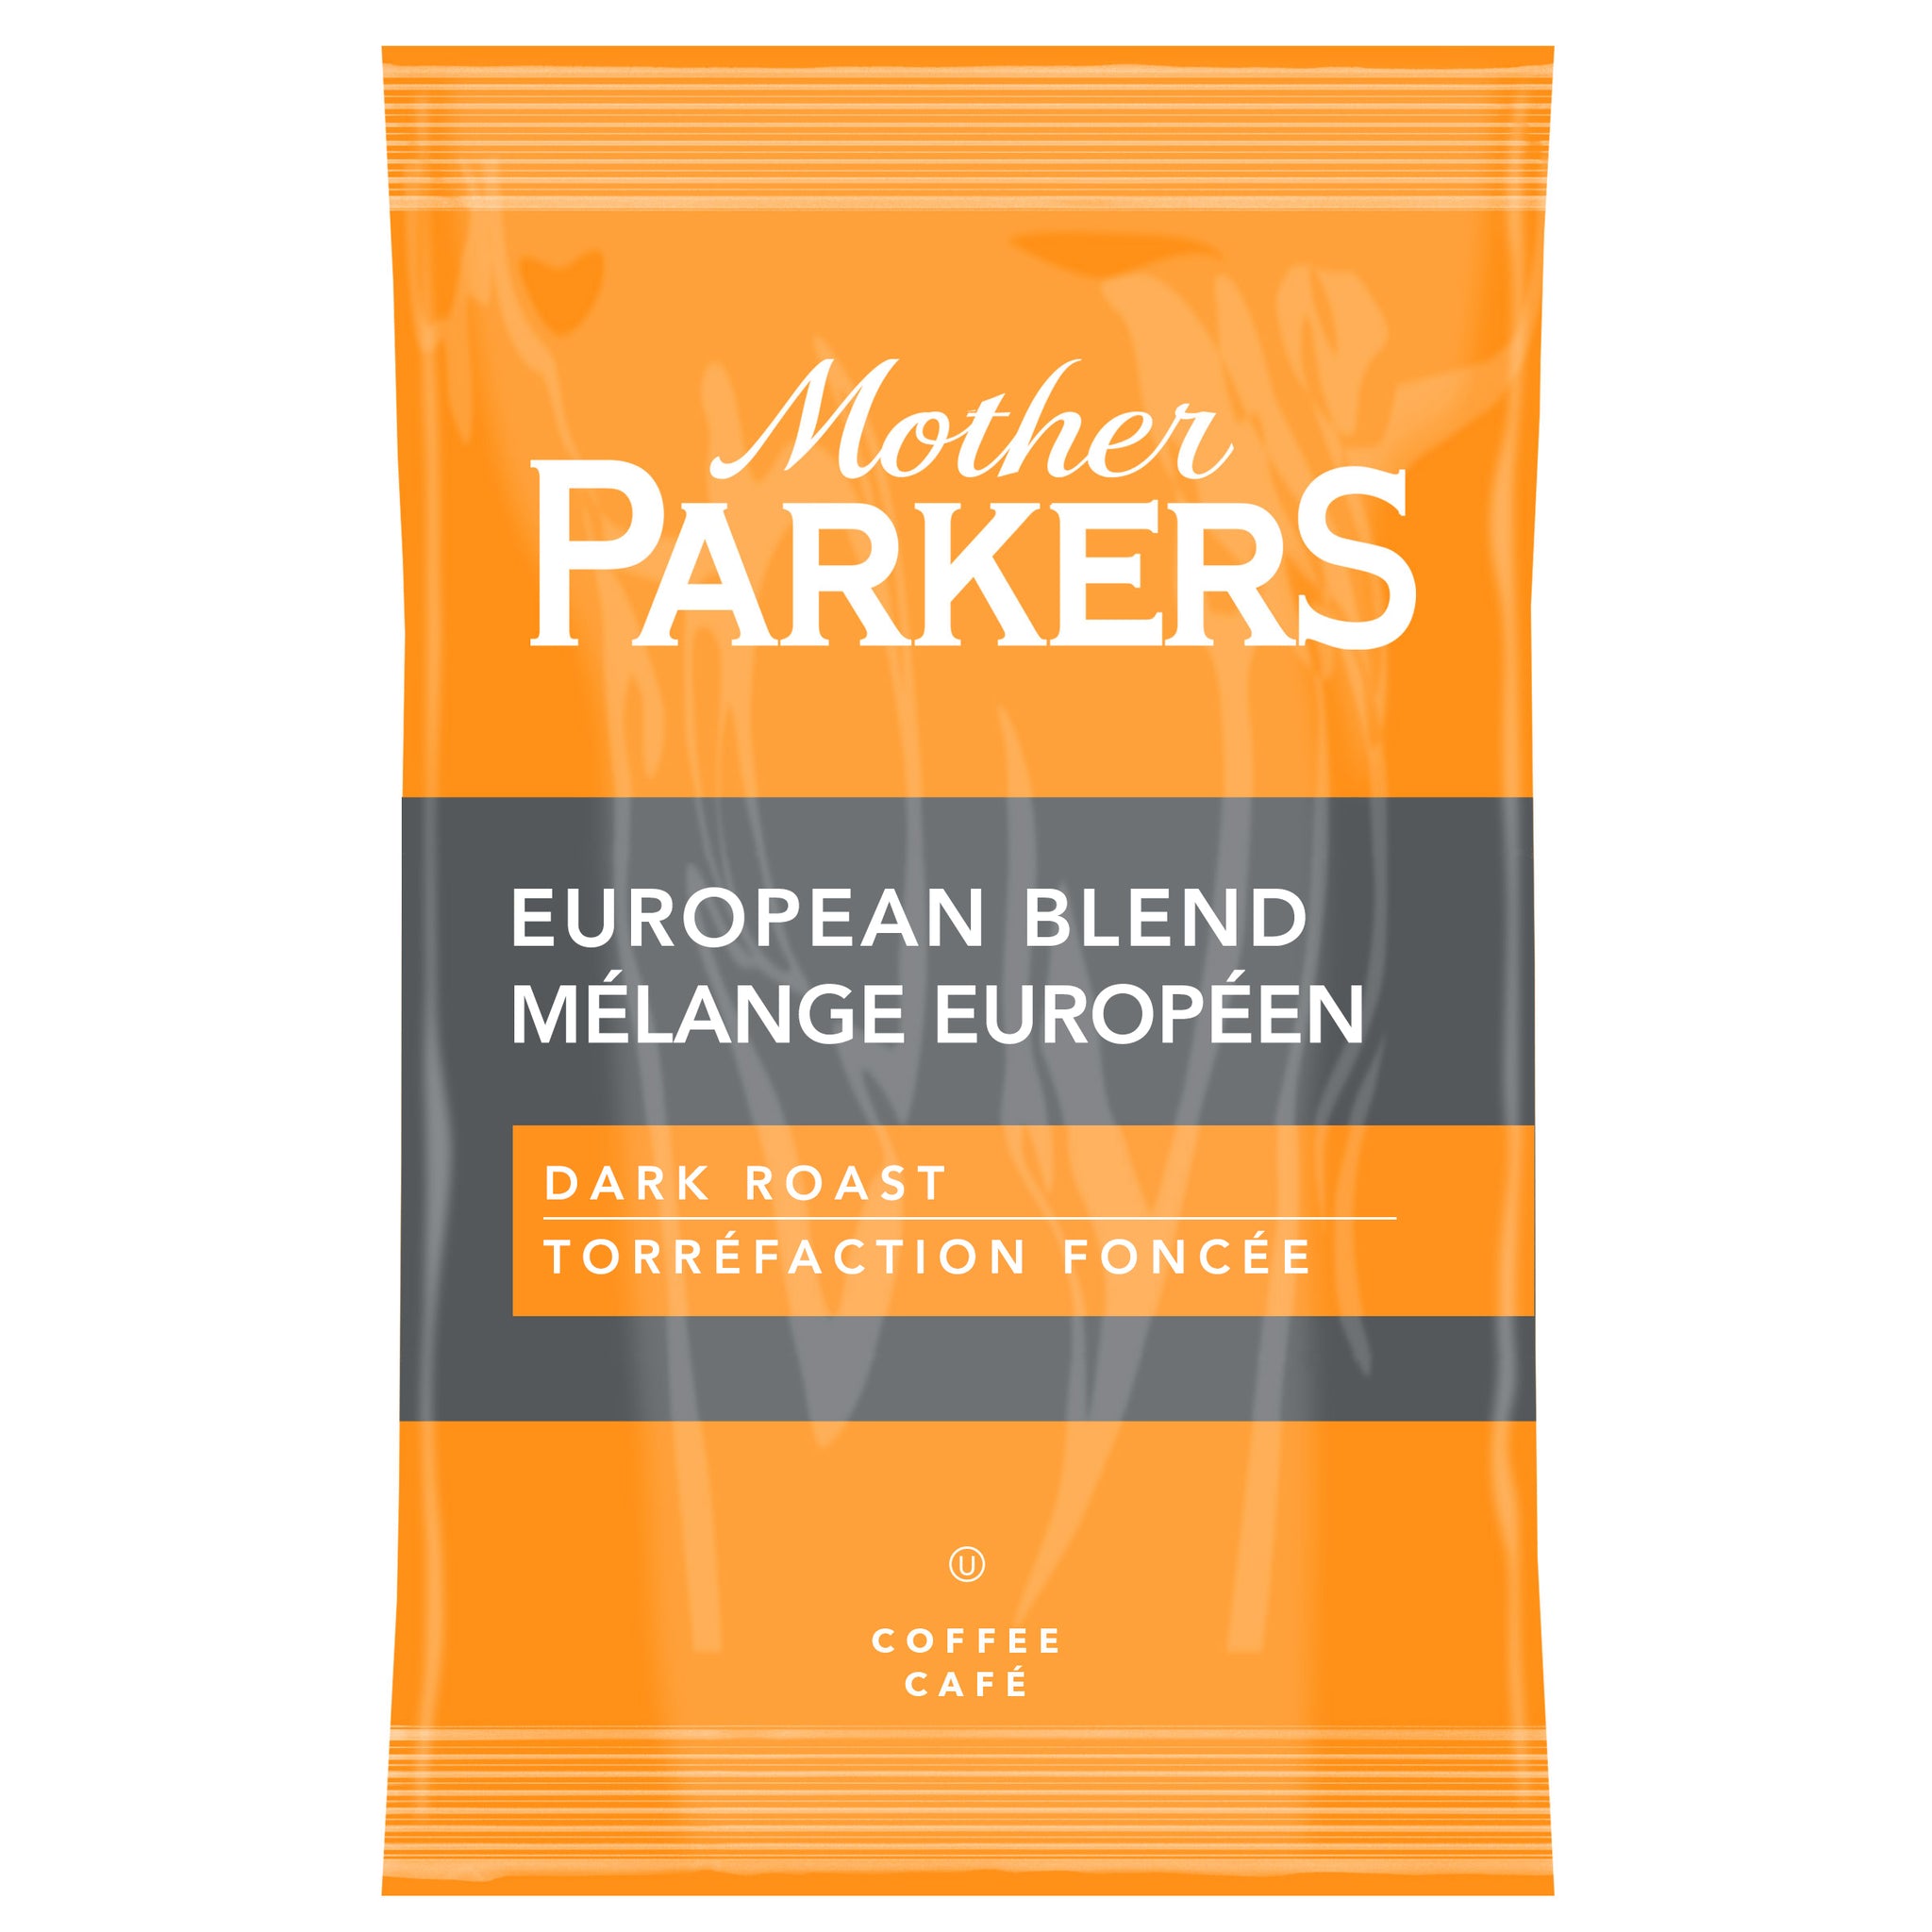 COFFEE PACK/ Mother Parkers European Blend, 2.50 oz, 42 packs per case